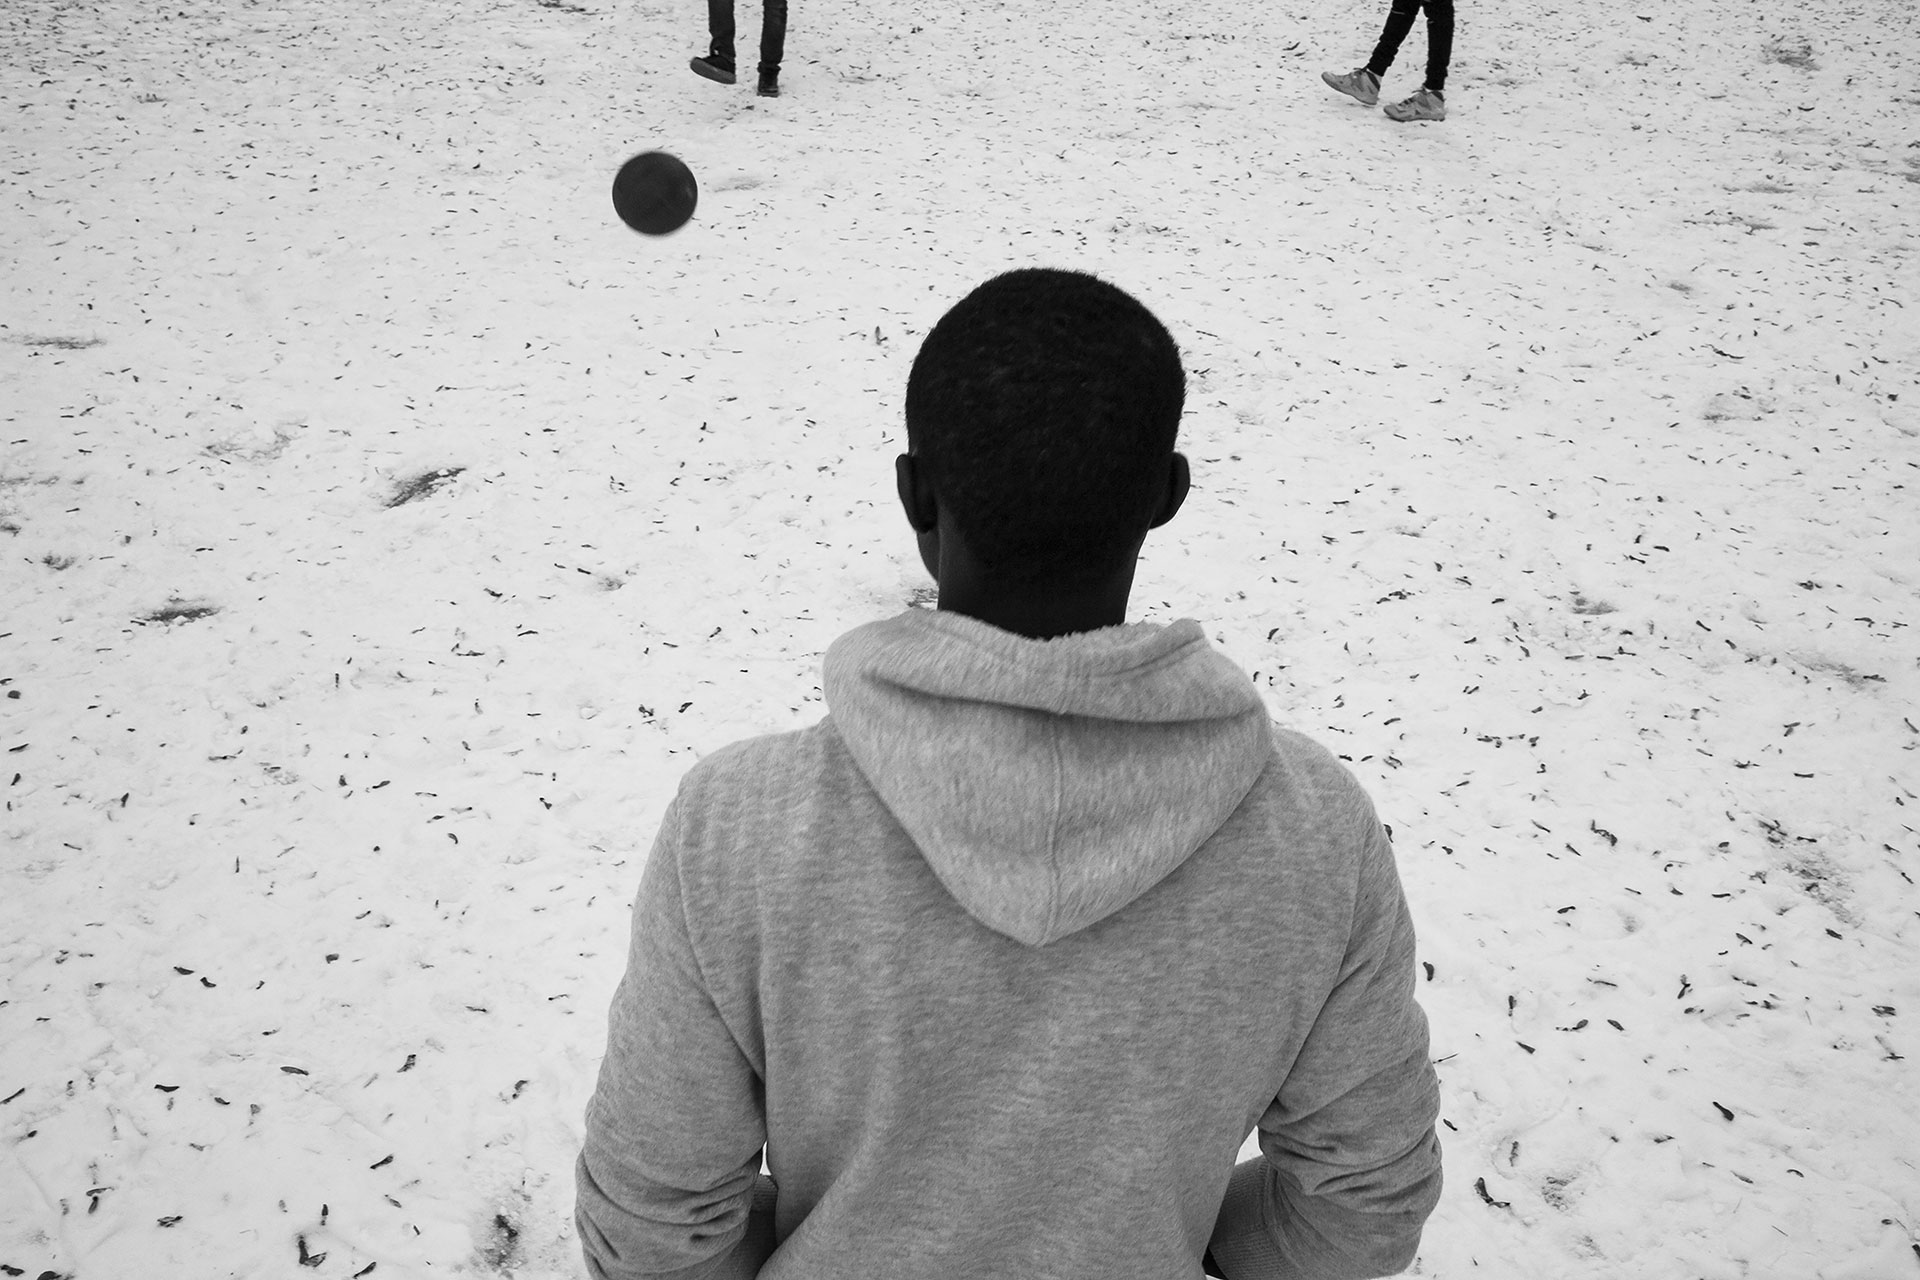 Baba from Senegal plays football with Malick from The Gambia and Mohammed from Mali in a snow-covered park near the centre where they live. Malick, like the others, saw snow for the first time during winter 2017.